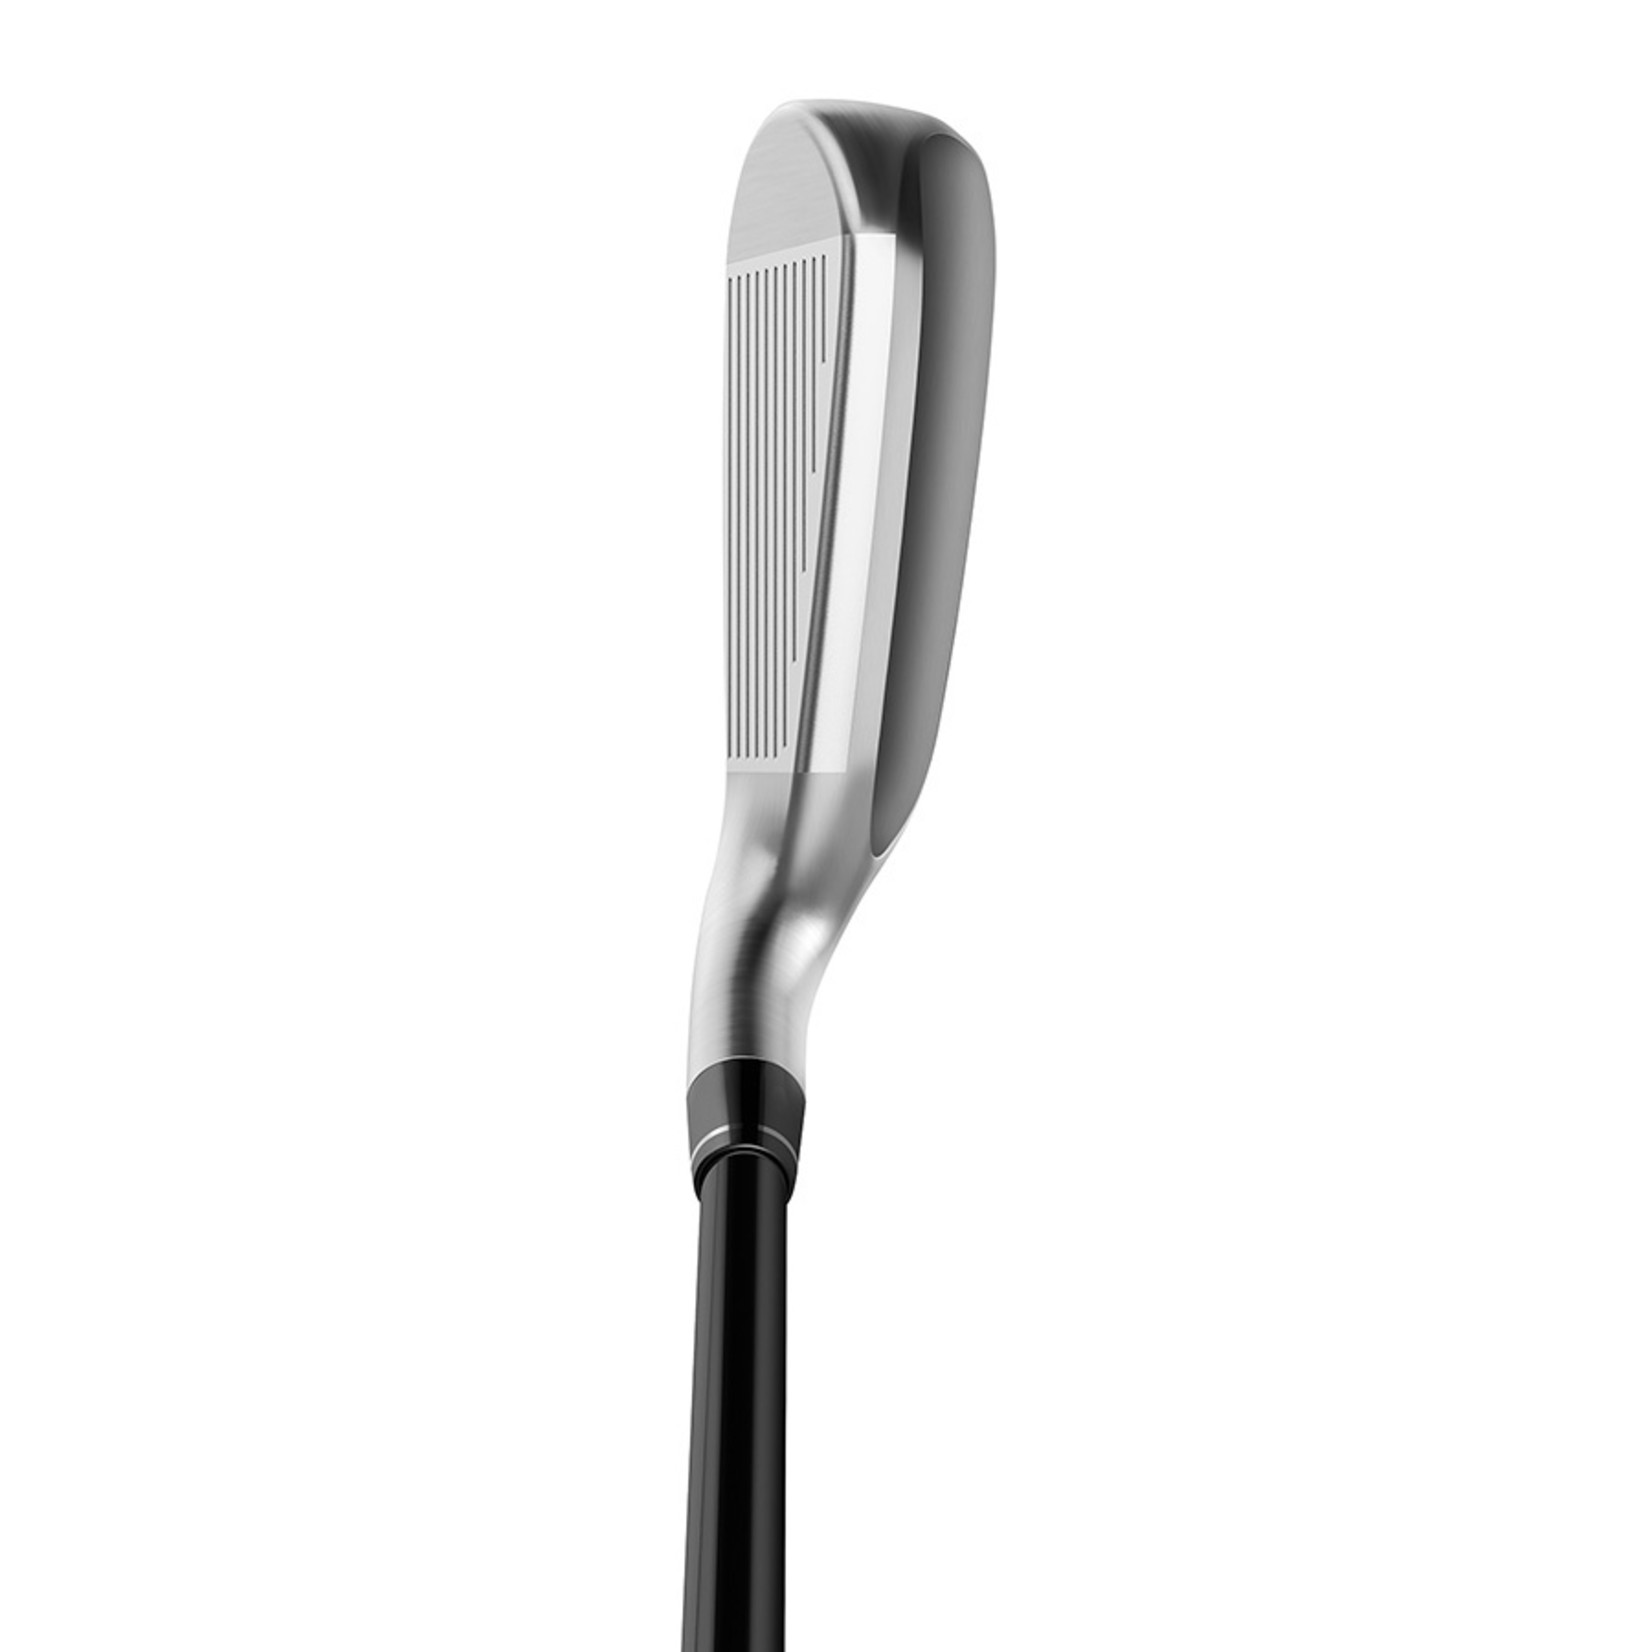 TaylorMade Stealth DHY - Graphite